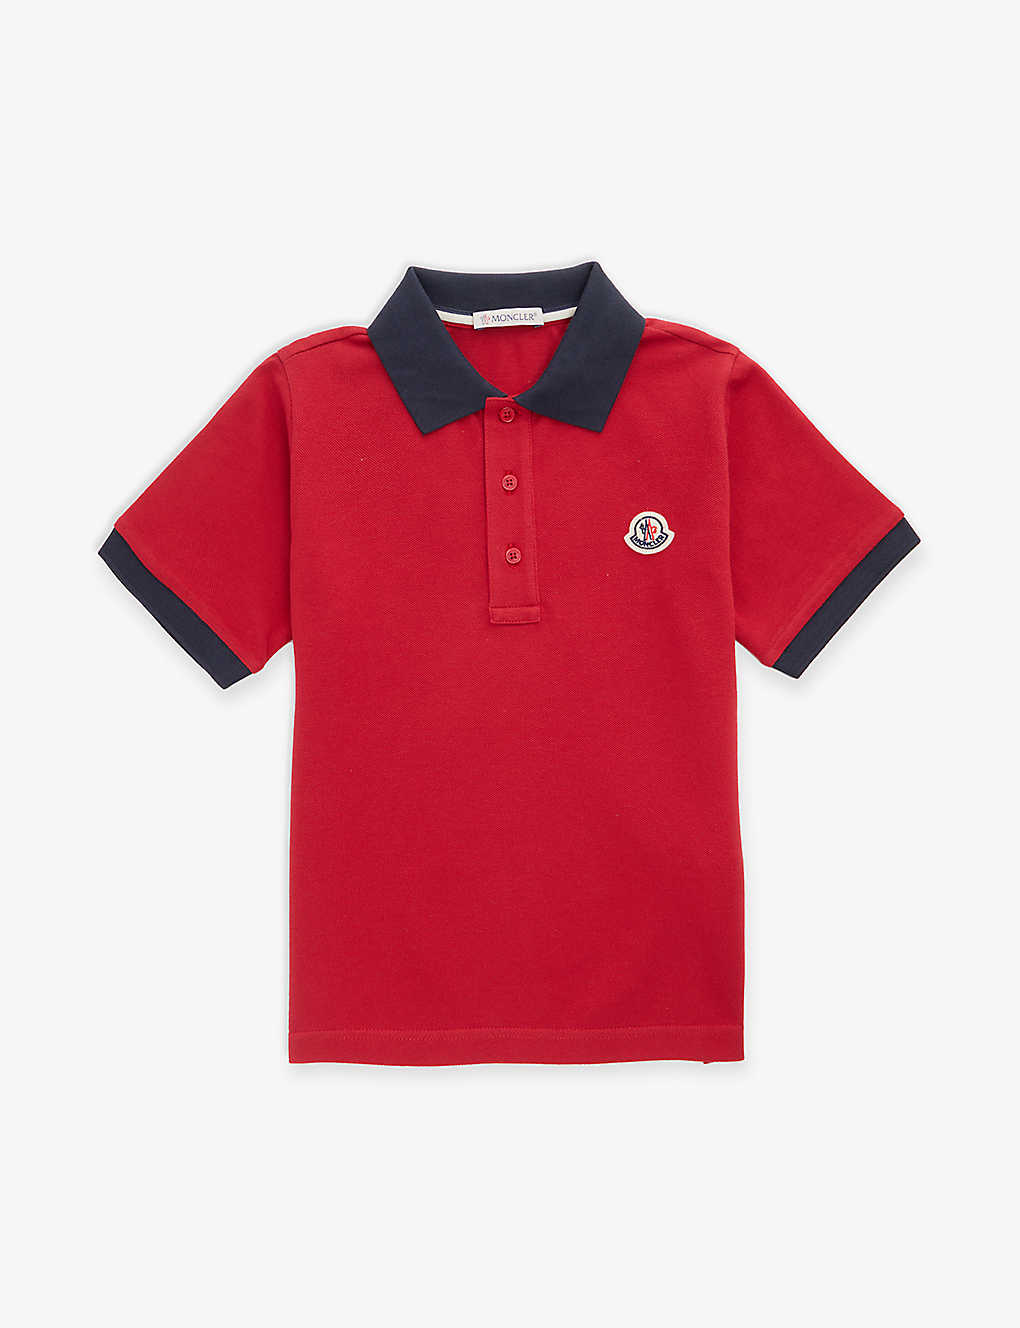 MONCLER MONCLER BOYS RED KIDS BRAND-PATCH COTTON-PIQUE POLO SHIRT 4-14 YEARS,64096606